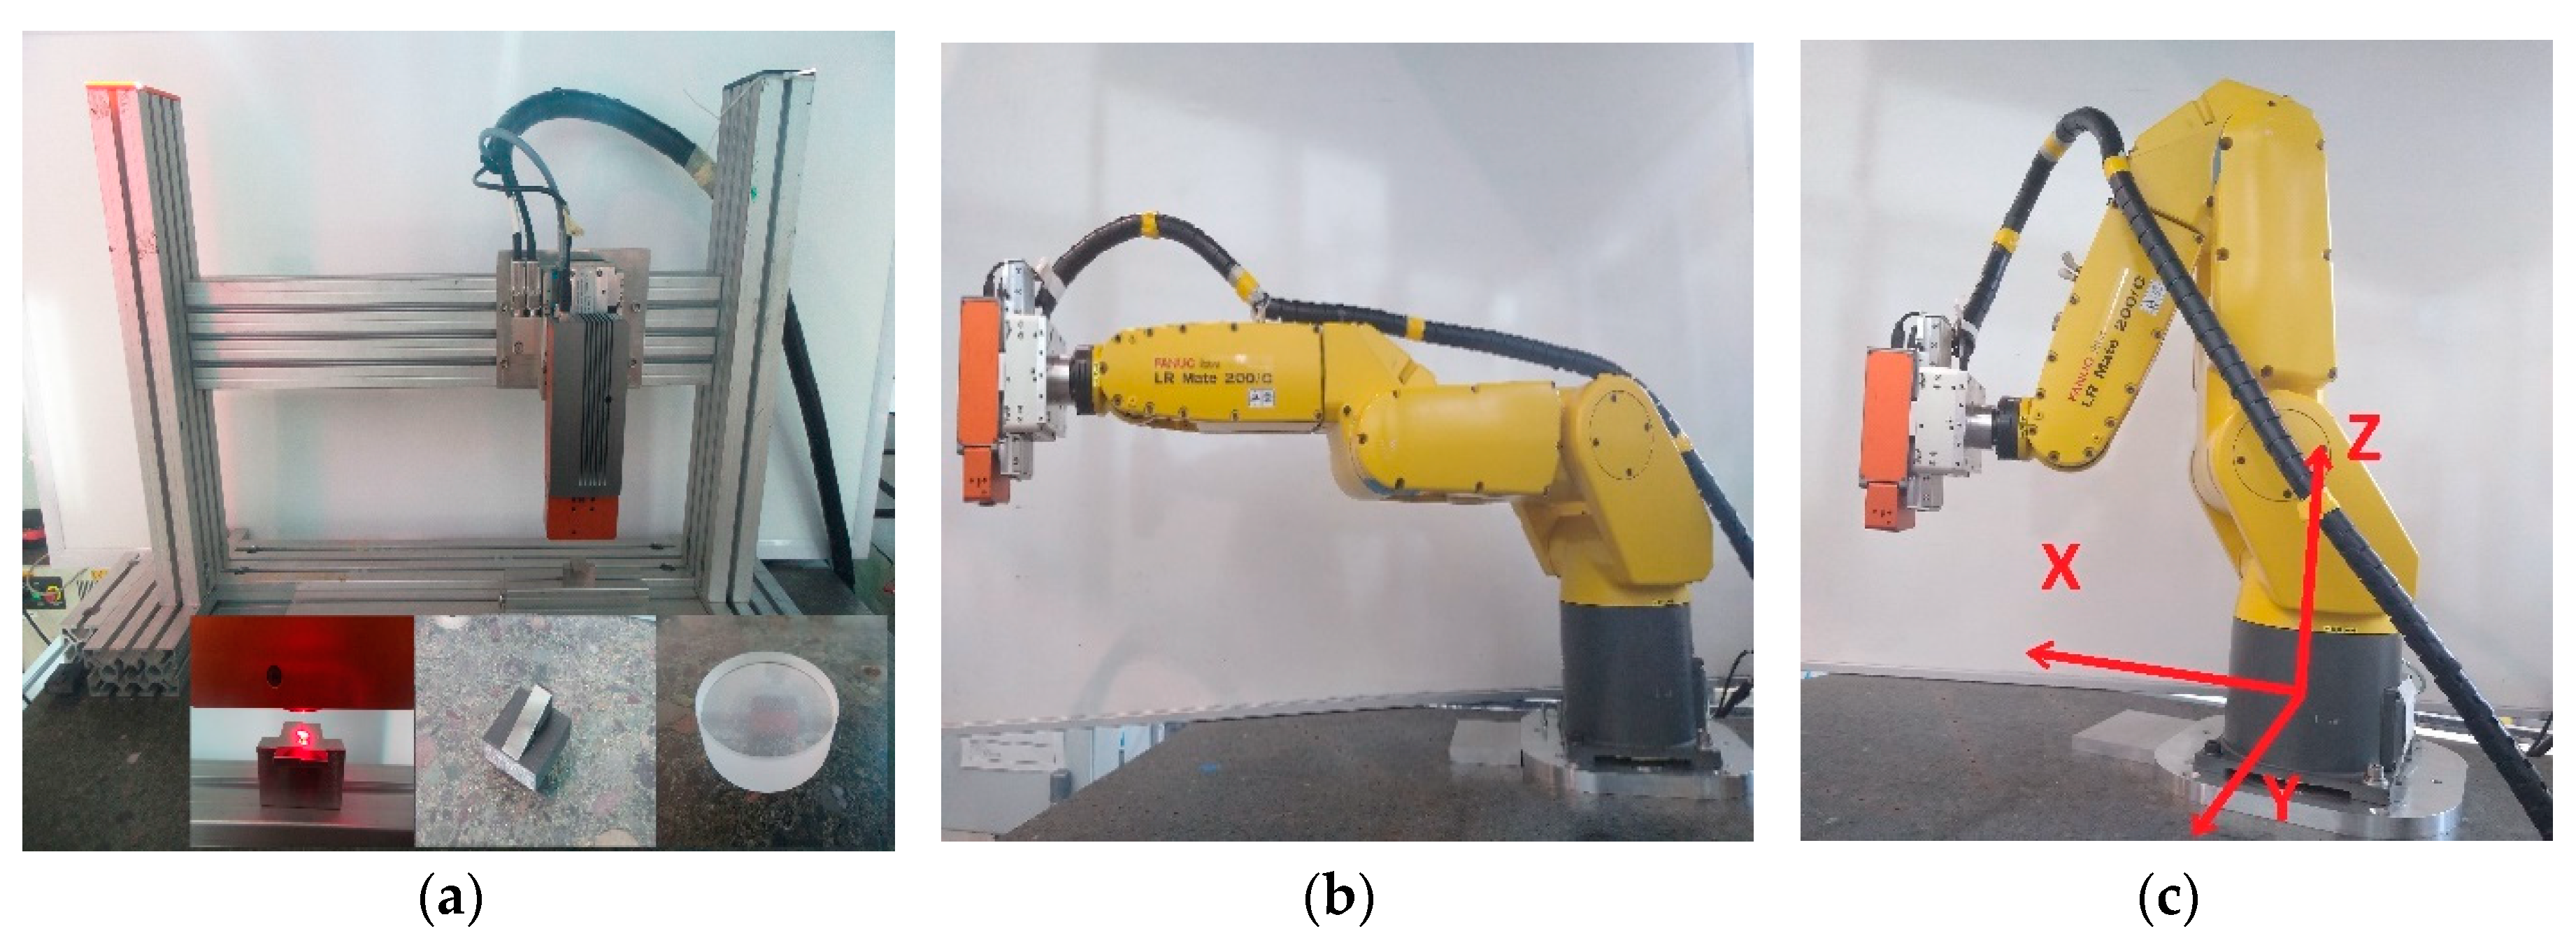 Sensors | Free Full-Text | Performance Evaluation of a Robot-Mounted  Interferometer for an Industrial Environment